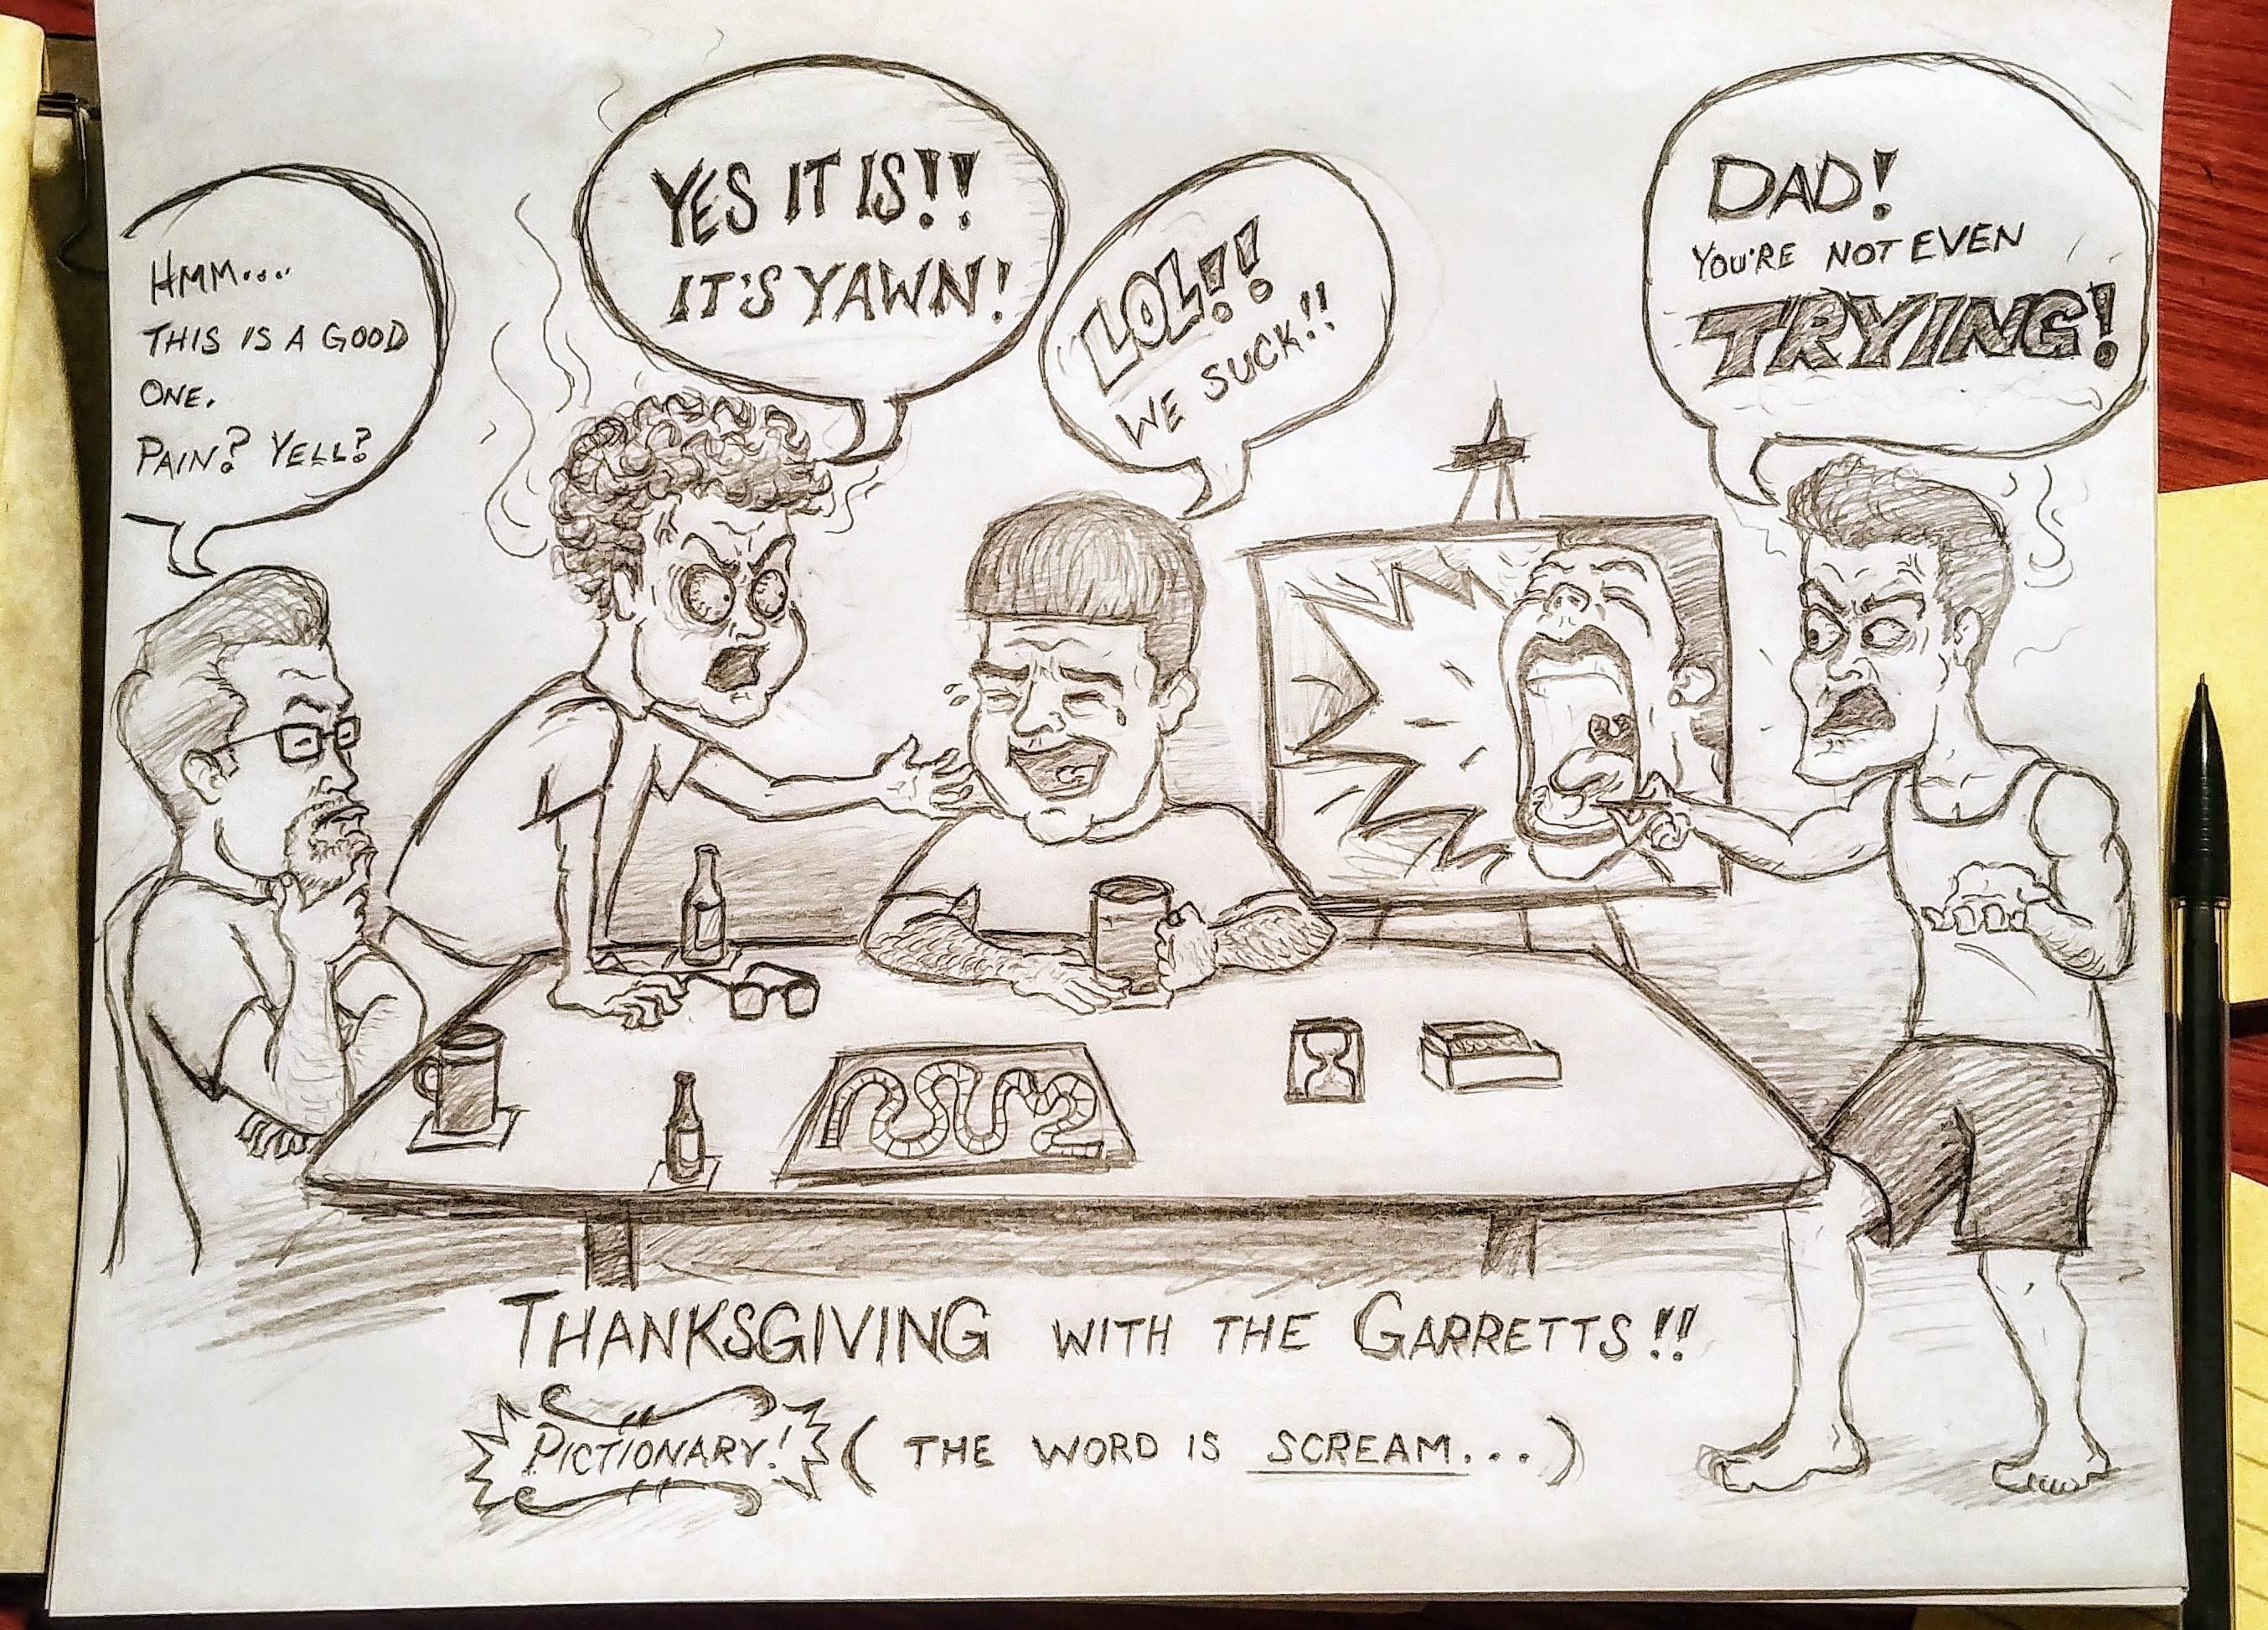 Every Thanksgiving we play drunk pictionary at my grandma's house with teams being boys vs girls. So to lift my grandma's spirits while she's sick, I drew a picture of the boys team.